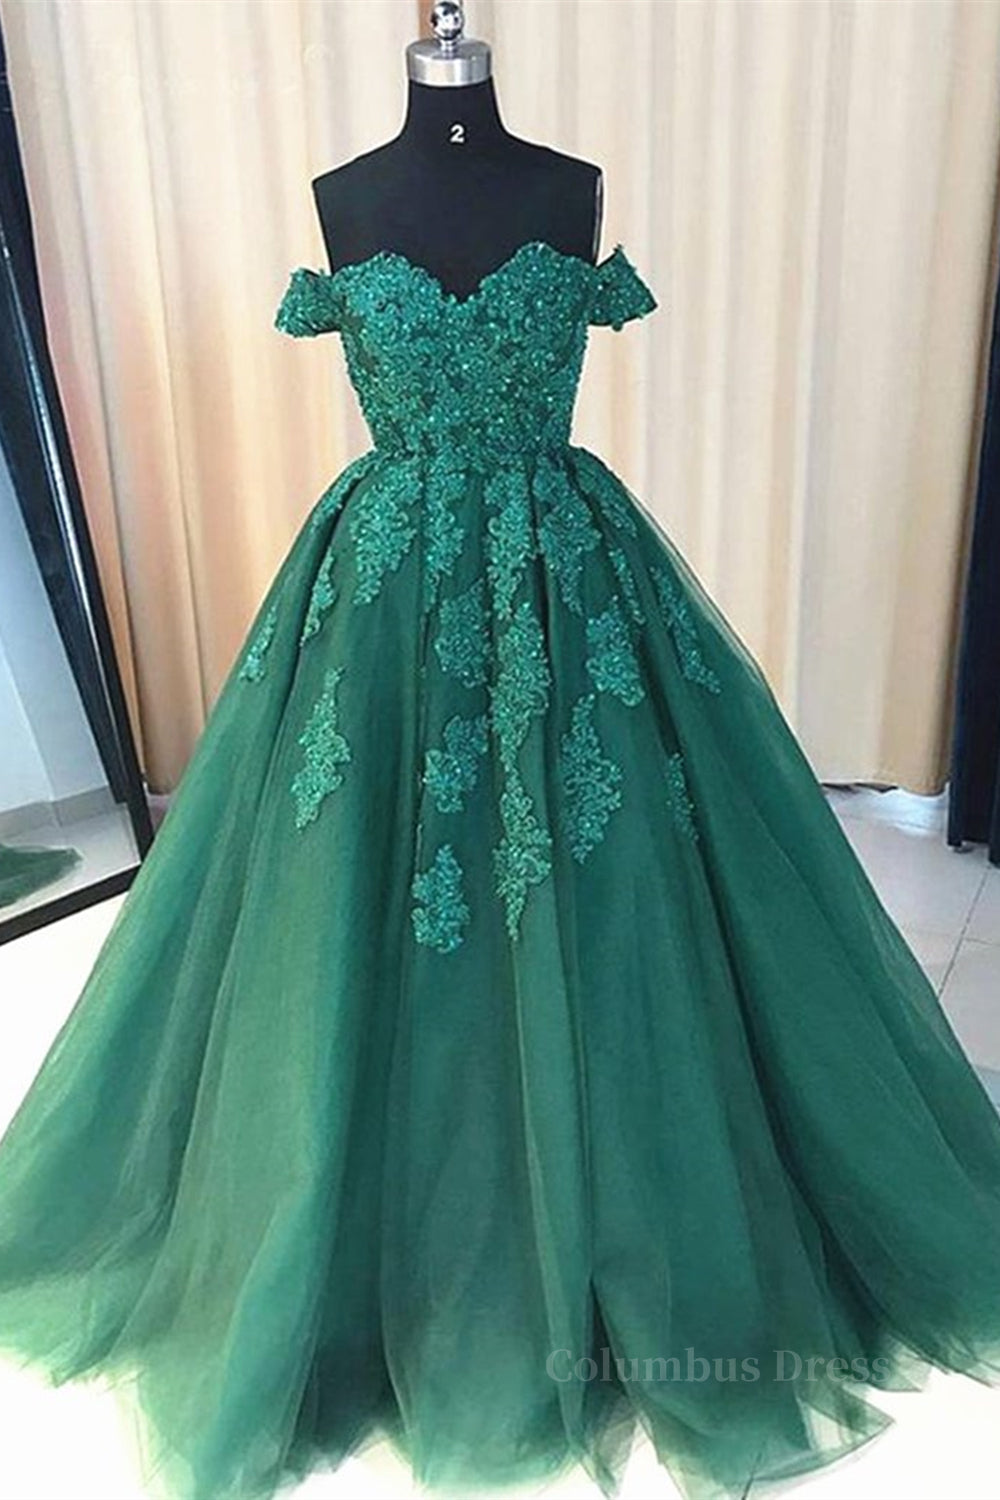 Party Dress Boots, Gorgeous Off Shoulder Green Lace Long Prom Dresses, Green Lace Formal Evening Dresses, Green Ball Gown